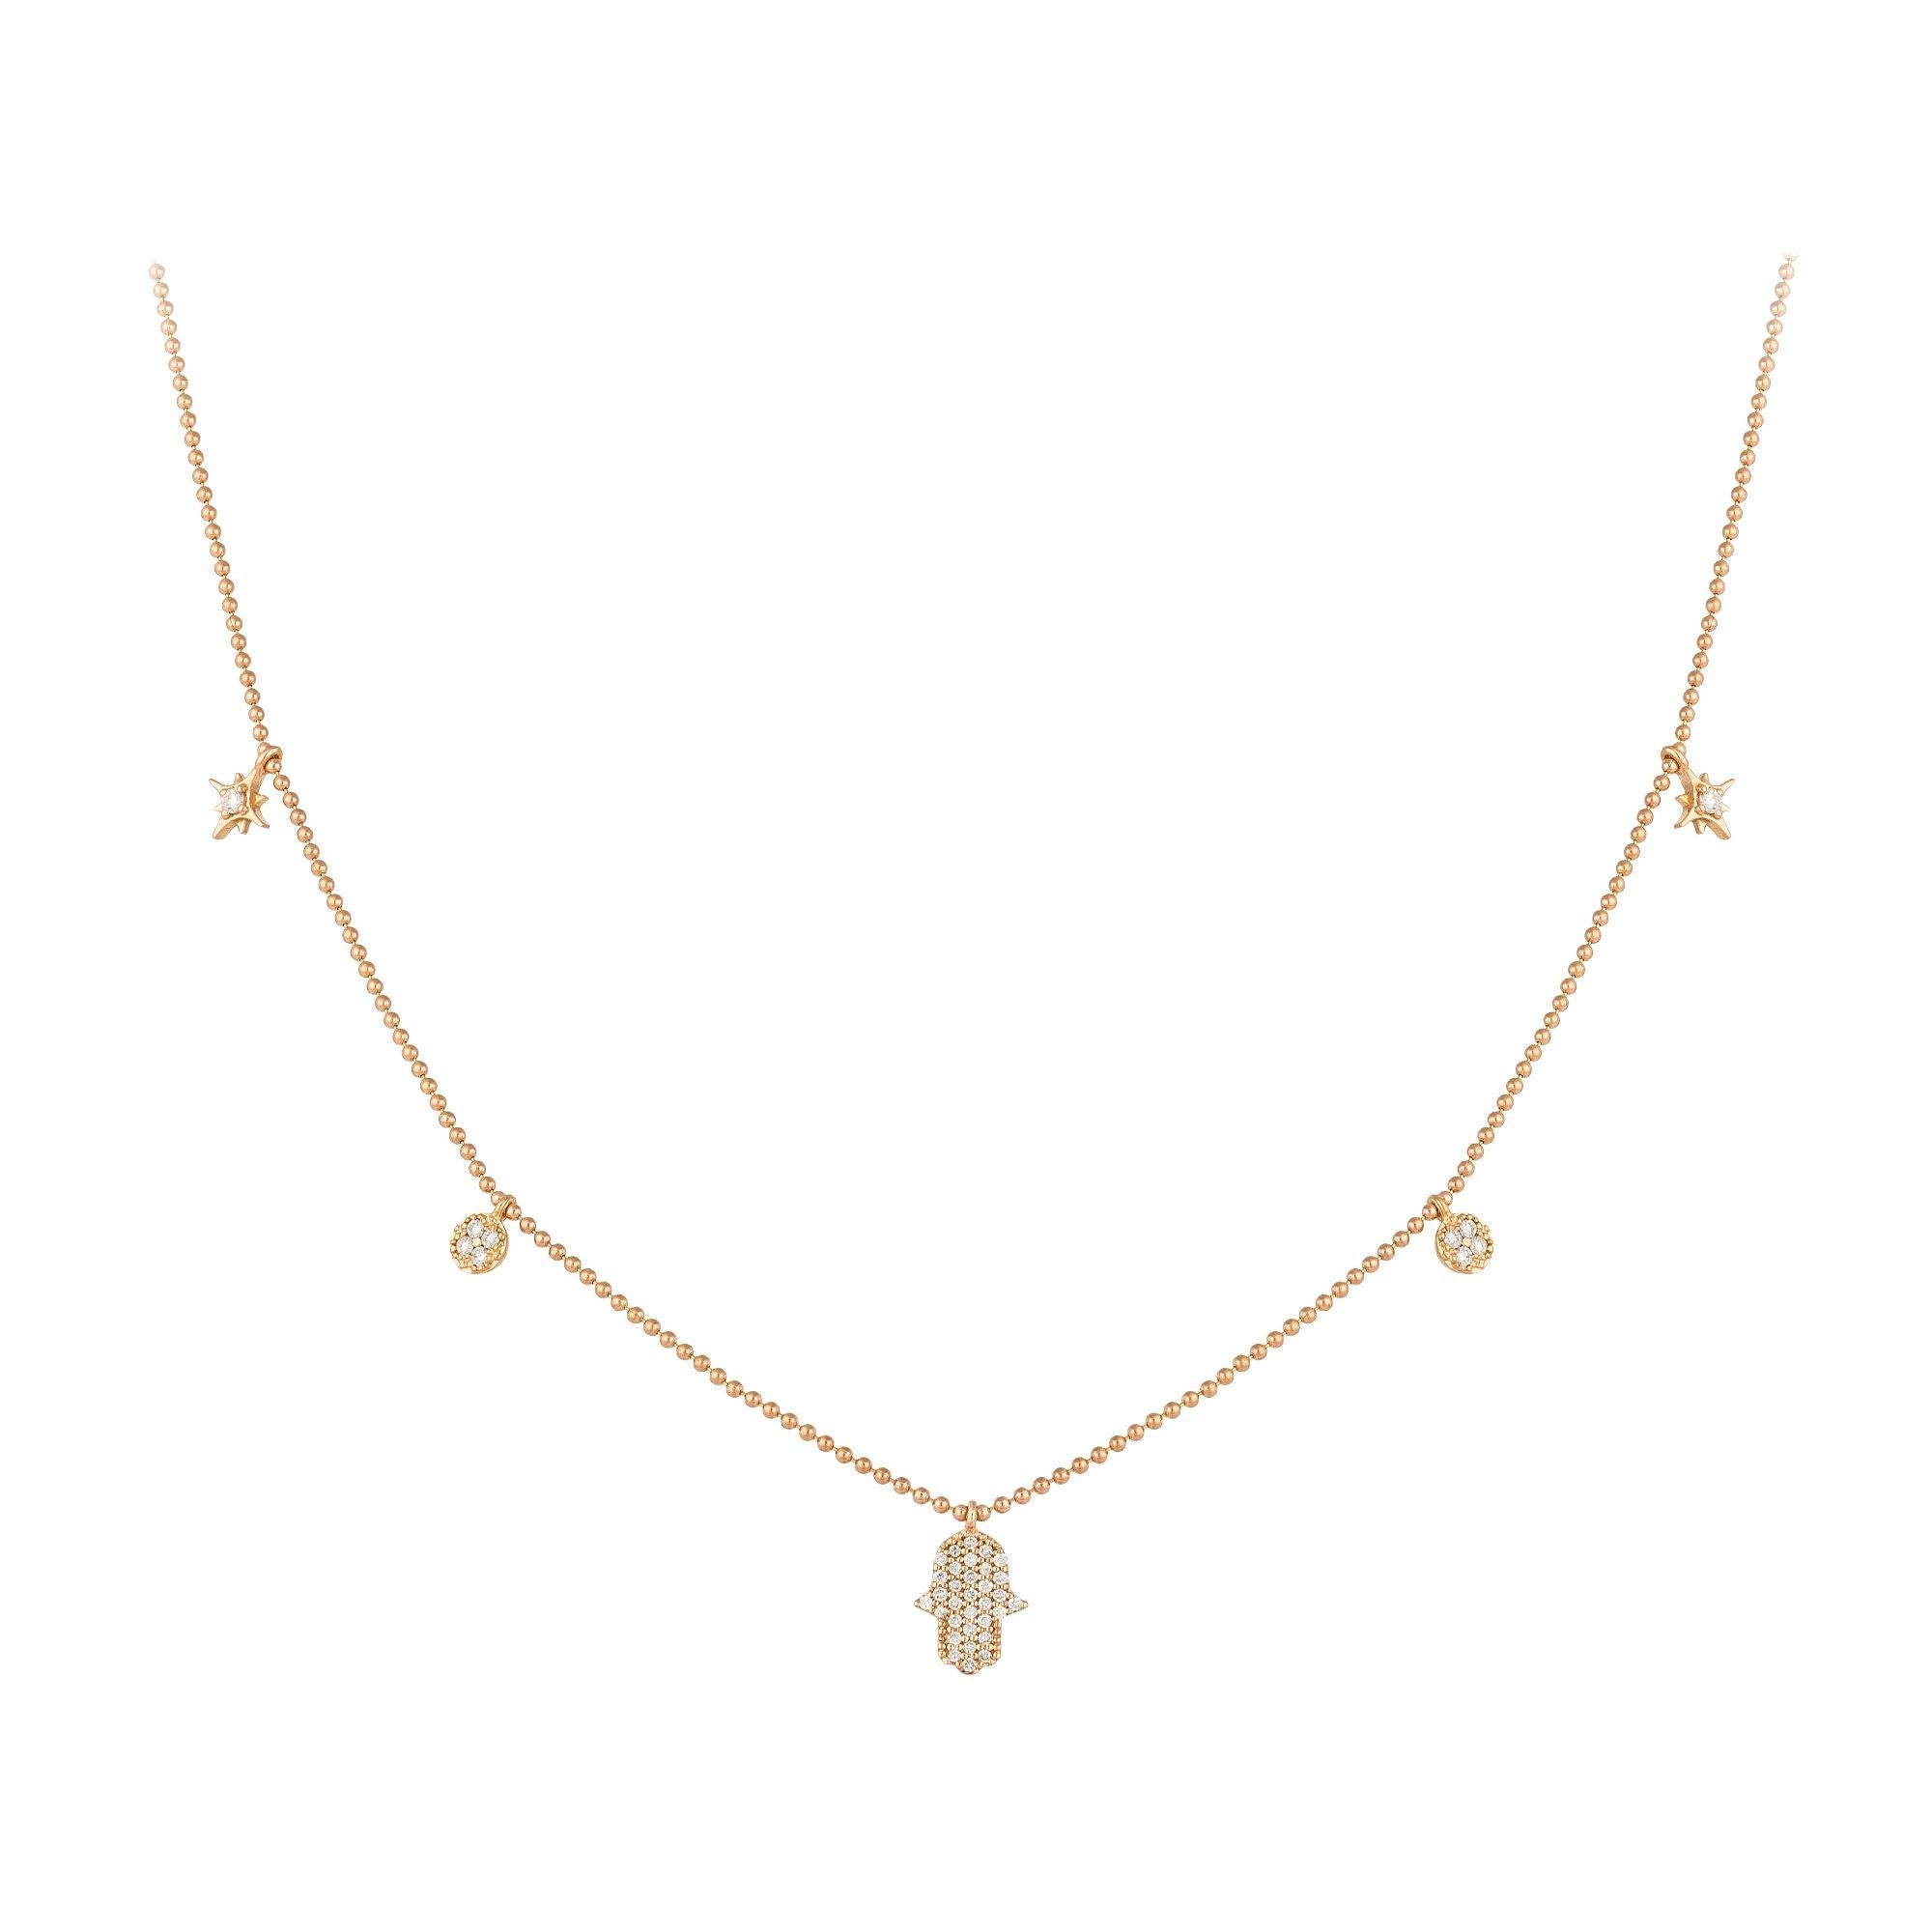 Breathtaking Diamond 18k Yellow Gold Necklace for Her